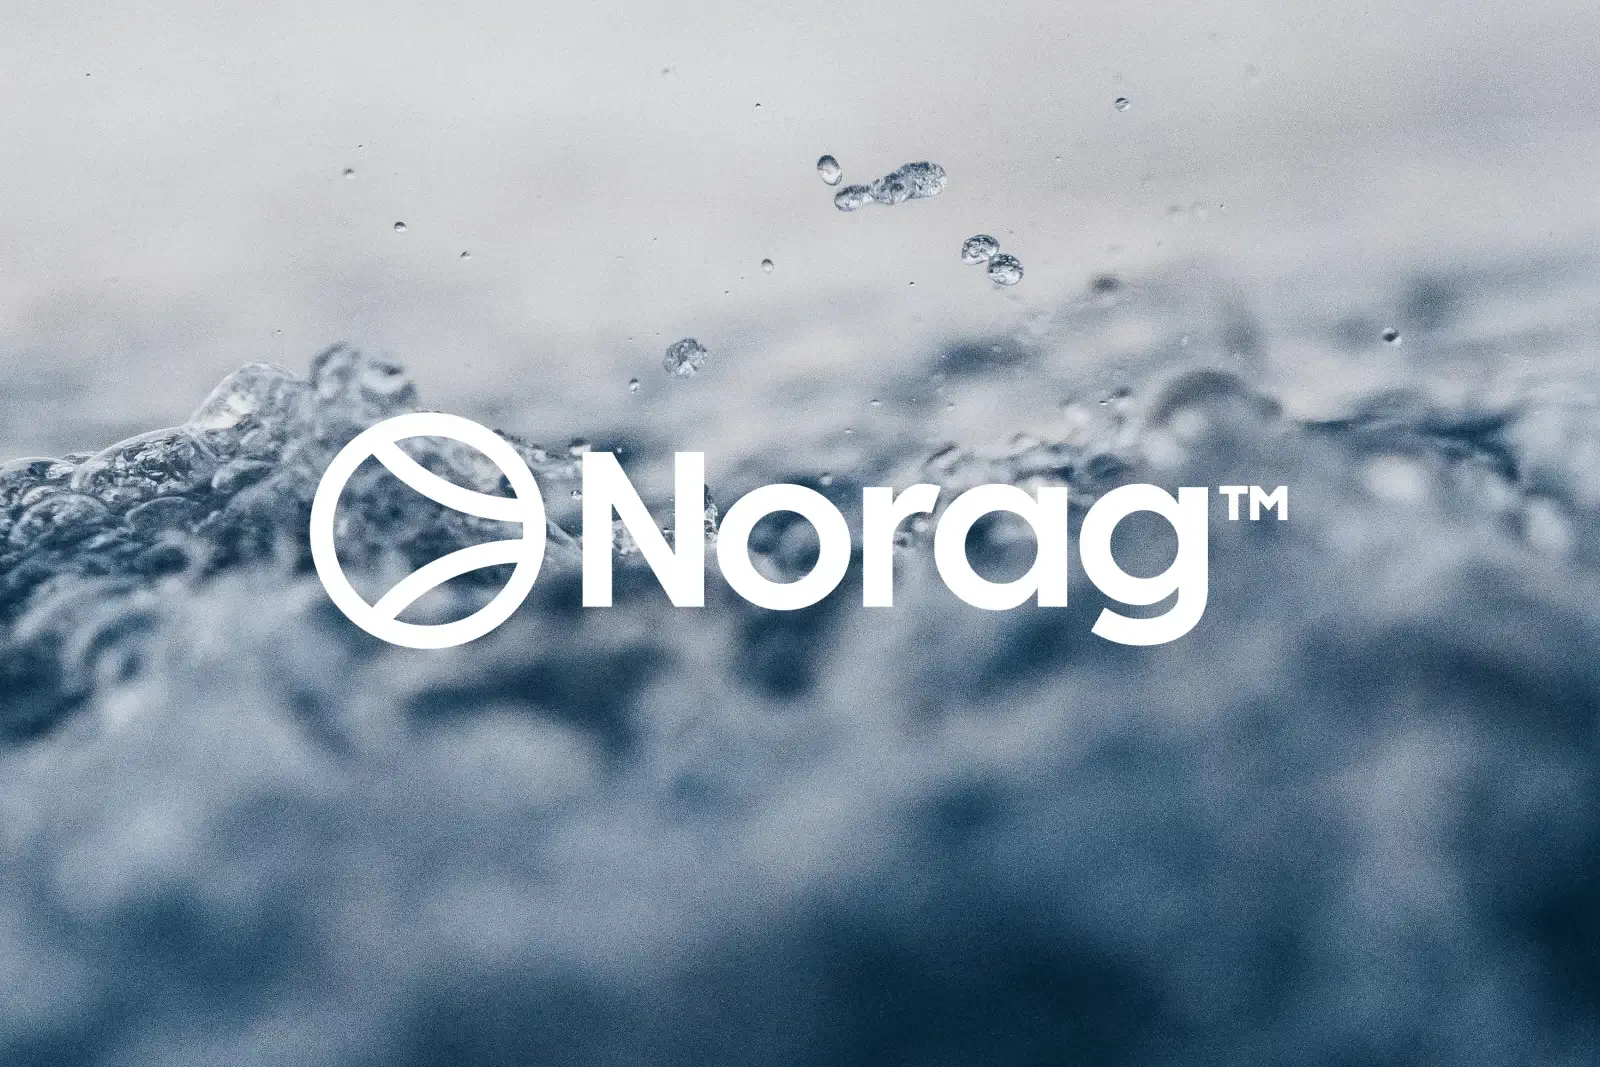 Norag's brand identity by Rebel Lion, showcasing innovation and simplicity in wastewater solutions, with emphasis on sustainability and leadership